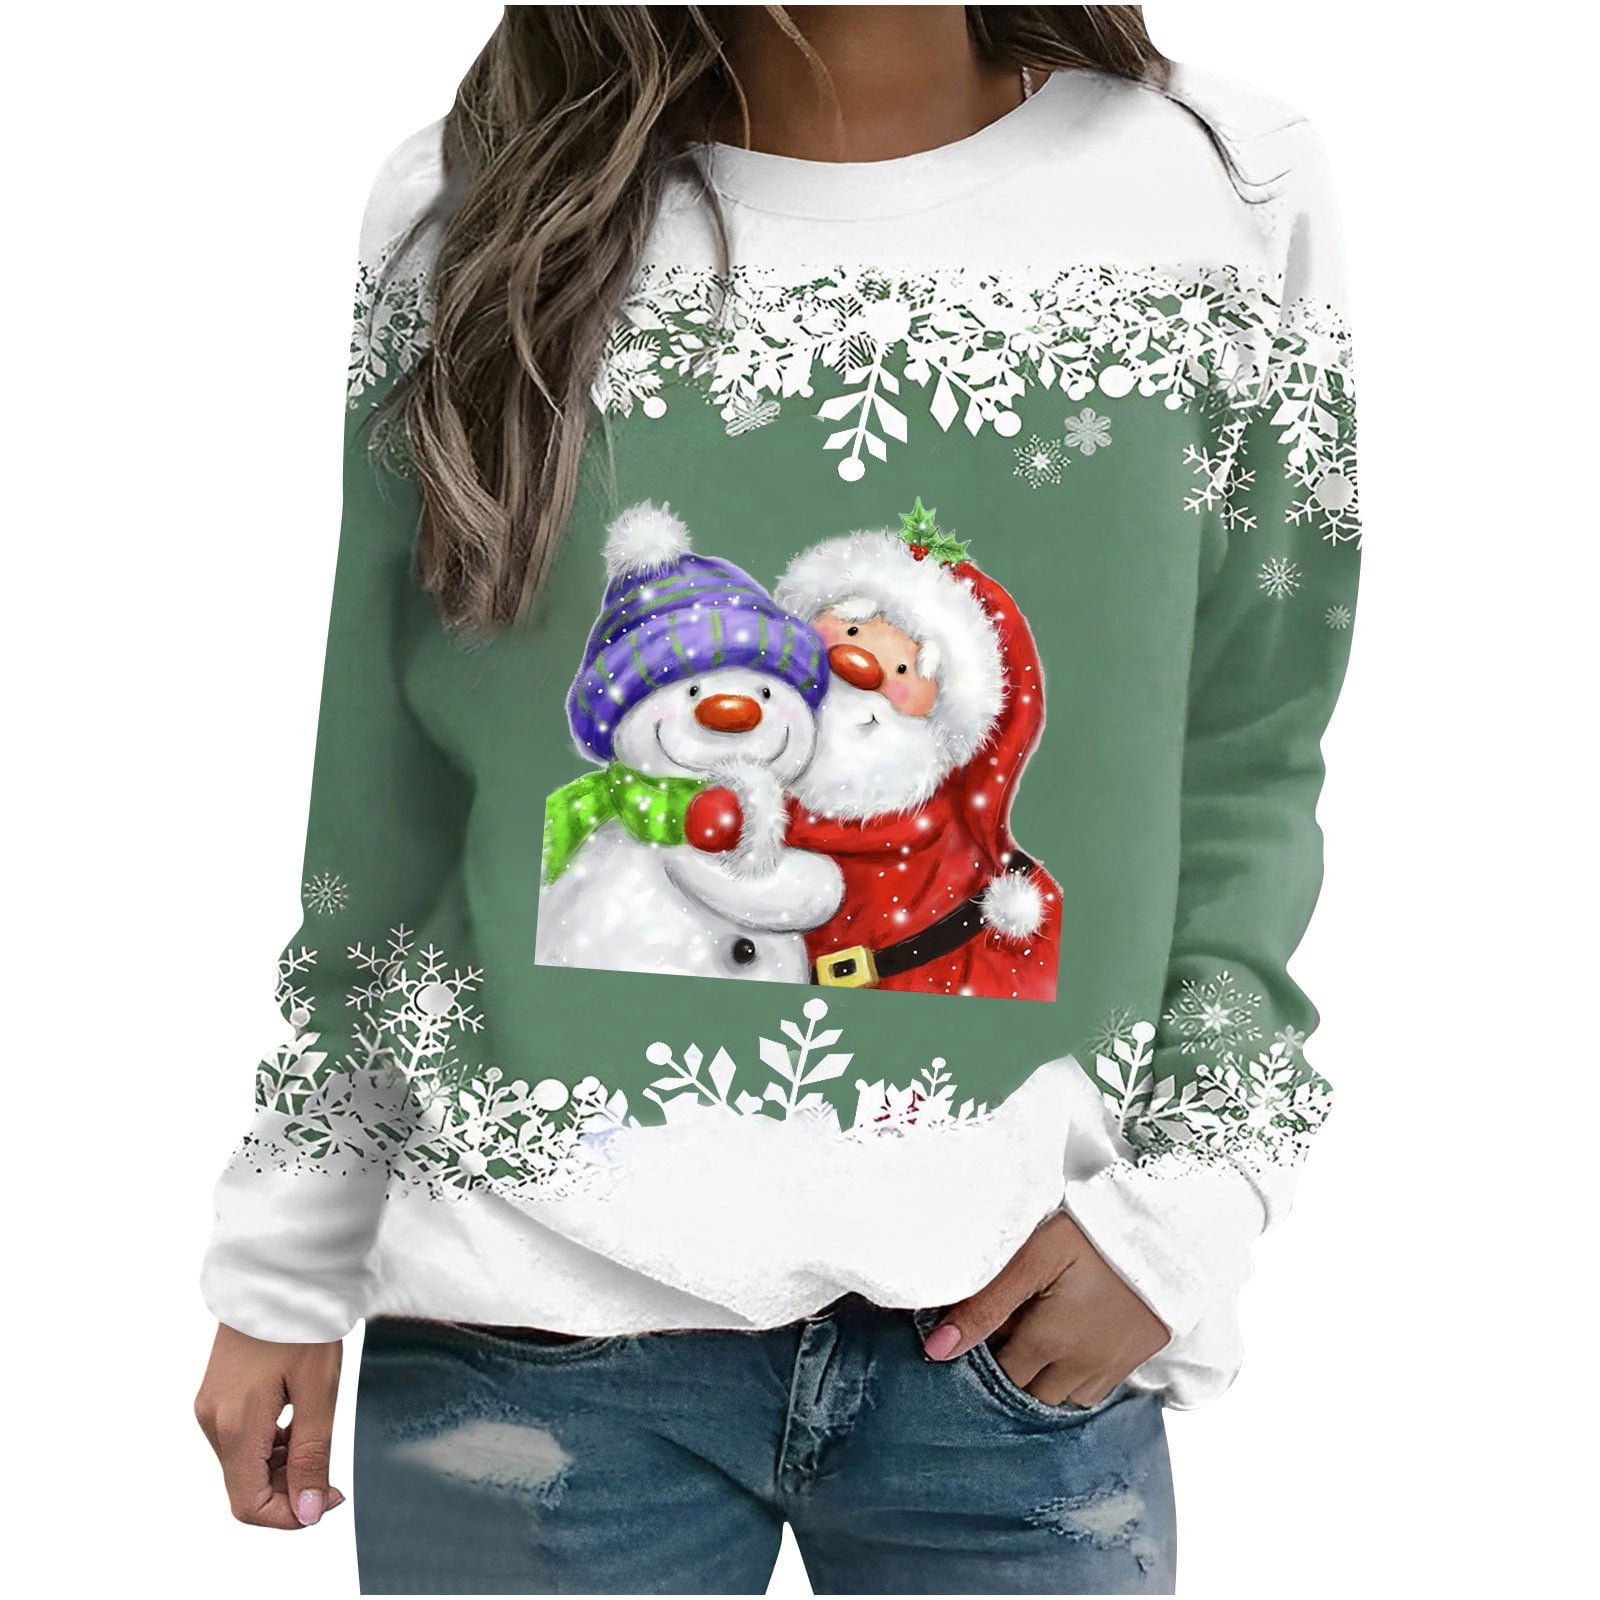 same day delivery items prime Funny Christmas Tee Shirts for Women Plus  Size Snowman Graphic Print Shirts Casual Long Sleeve Pullover Sweatshirts